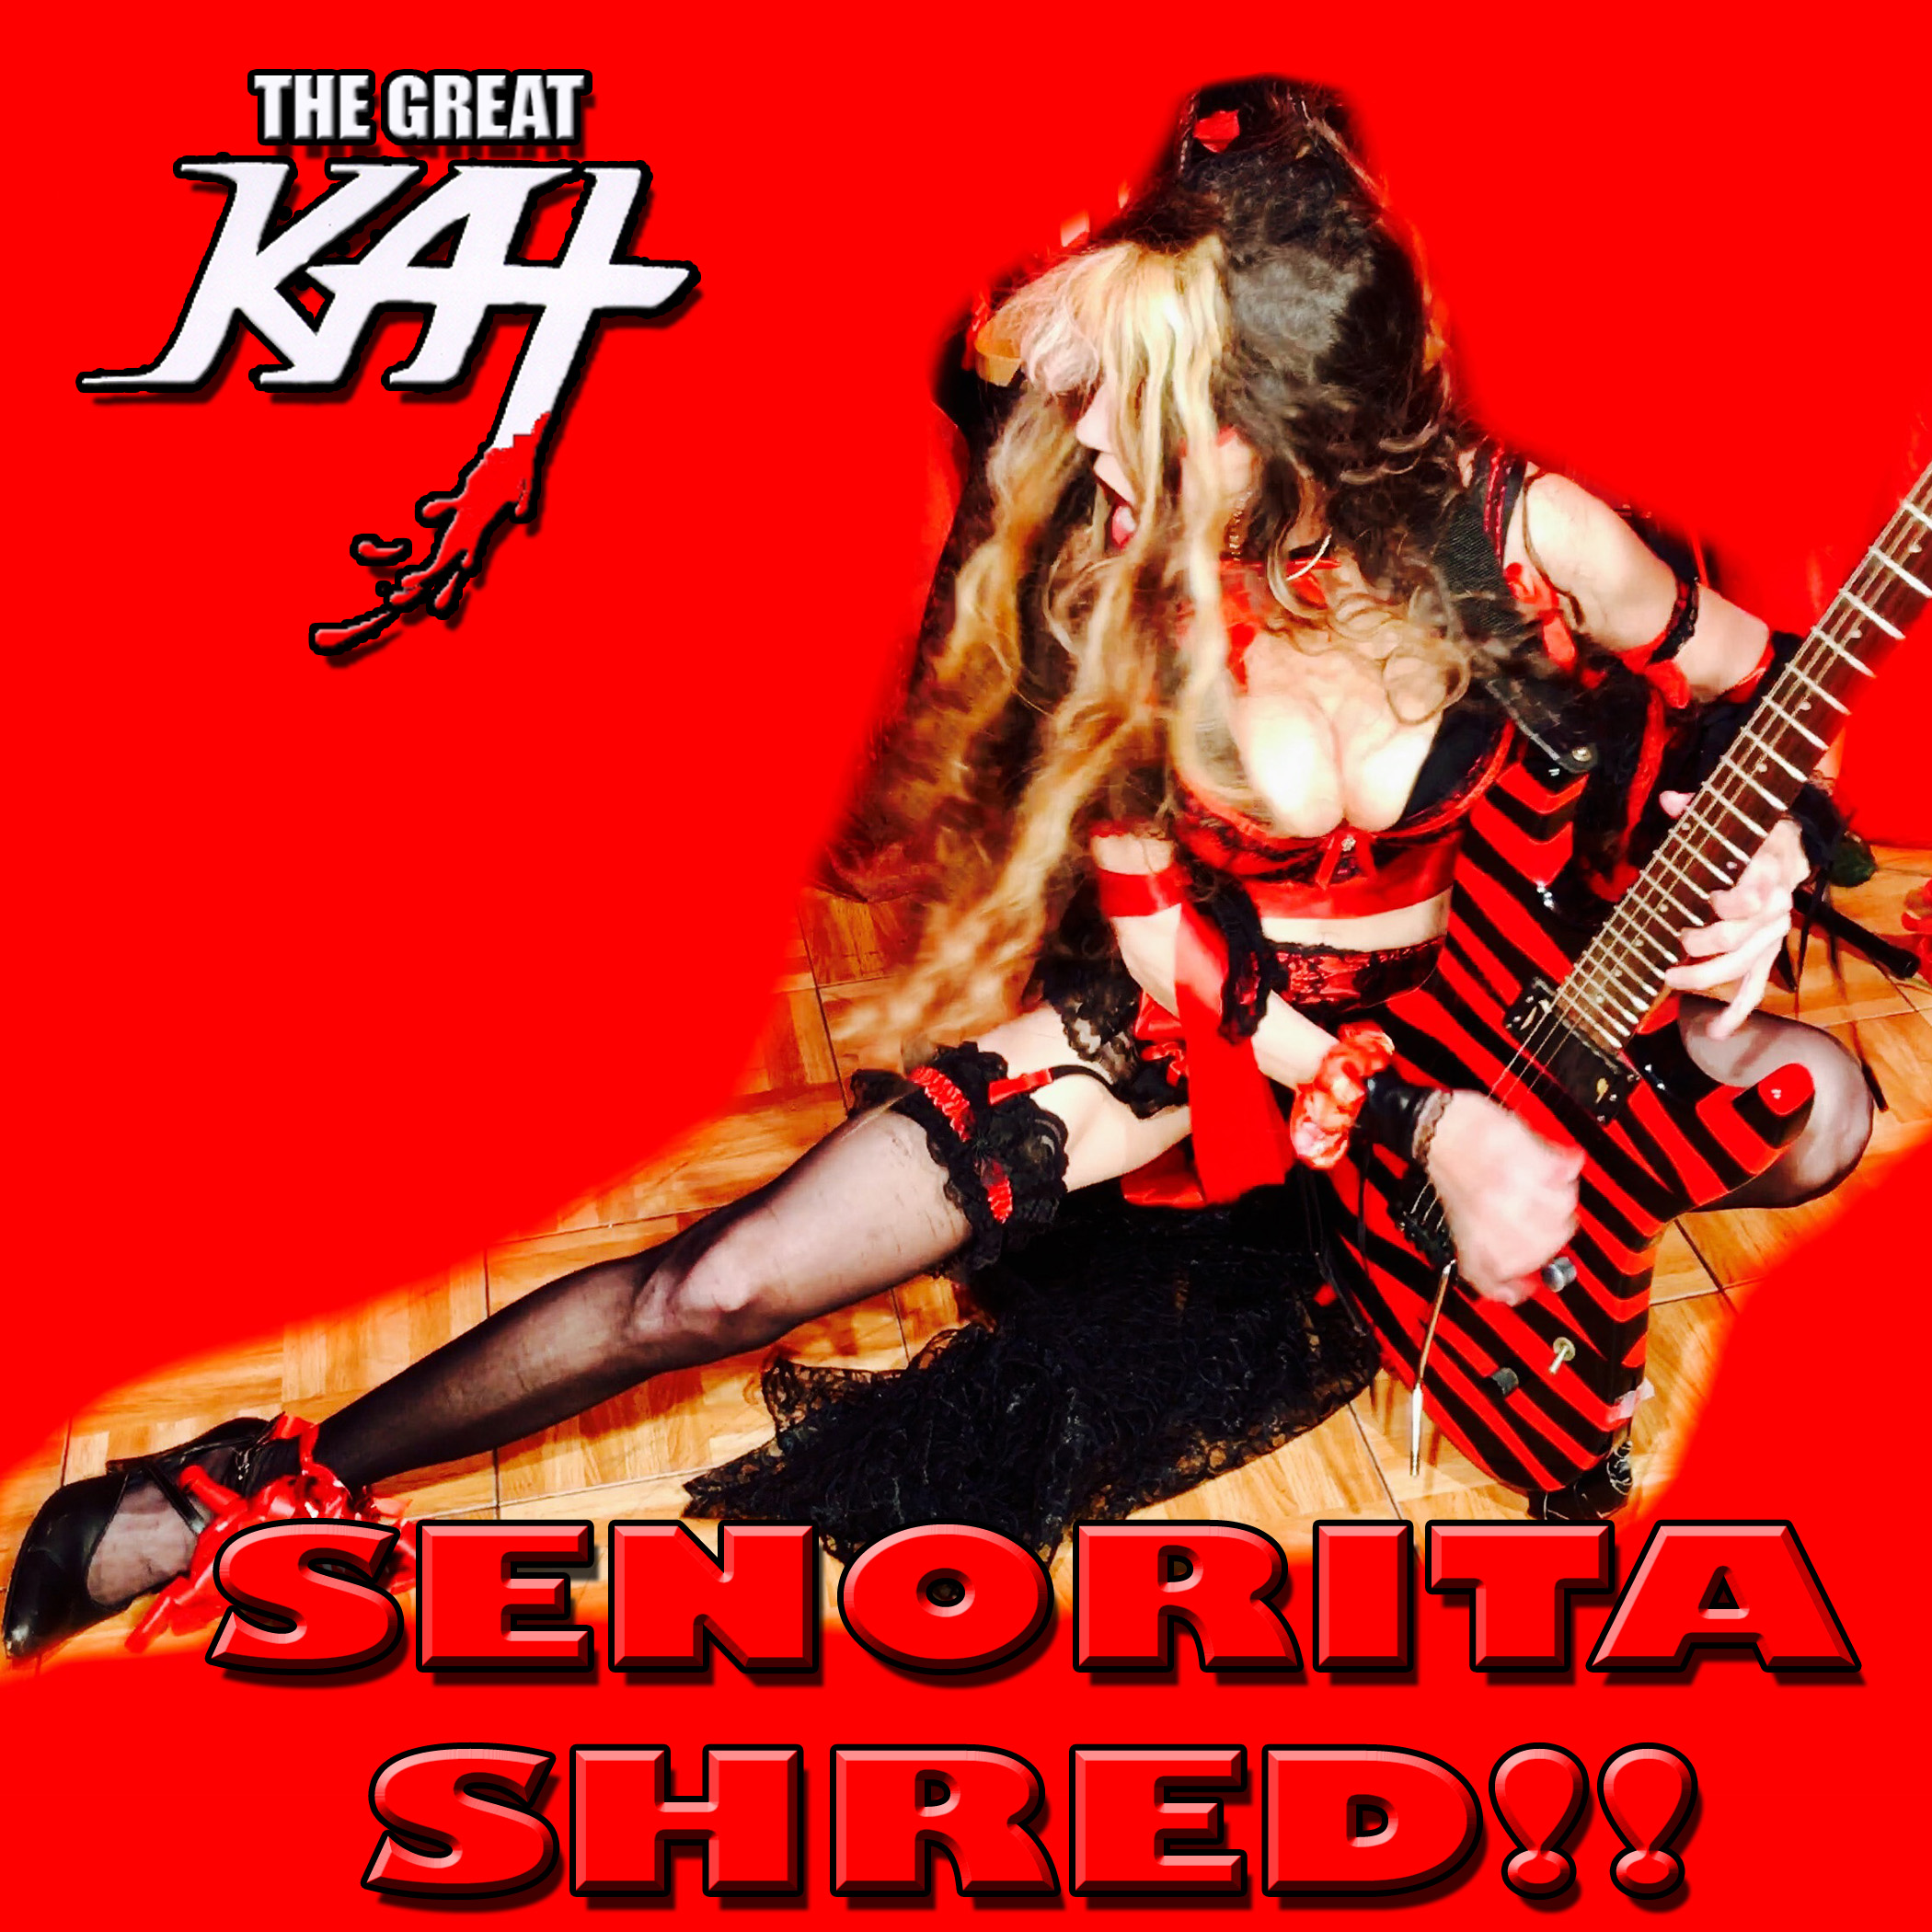 Ole First Look At New Great Kat Sarasate S Carmen Fantasy Video